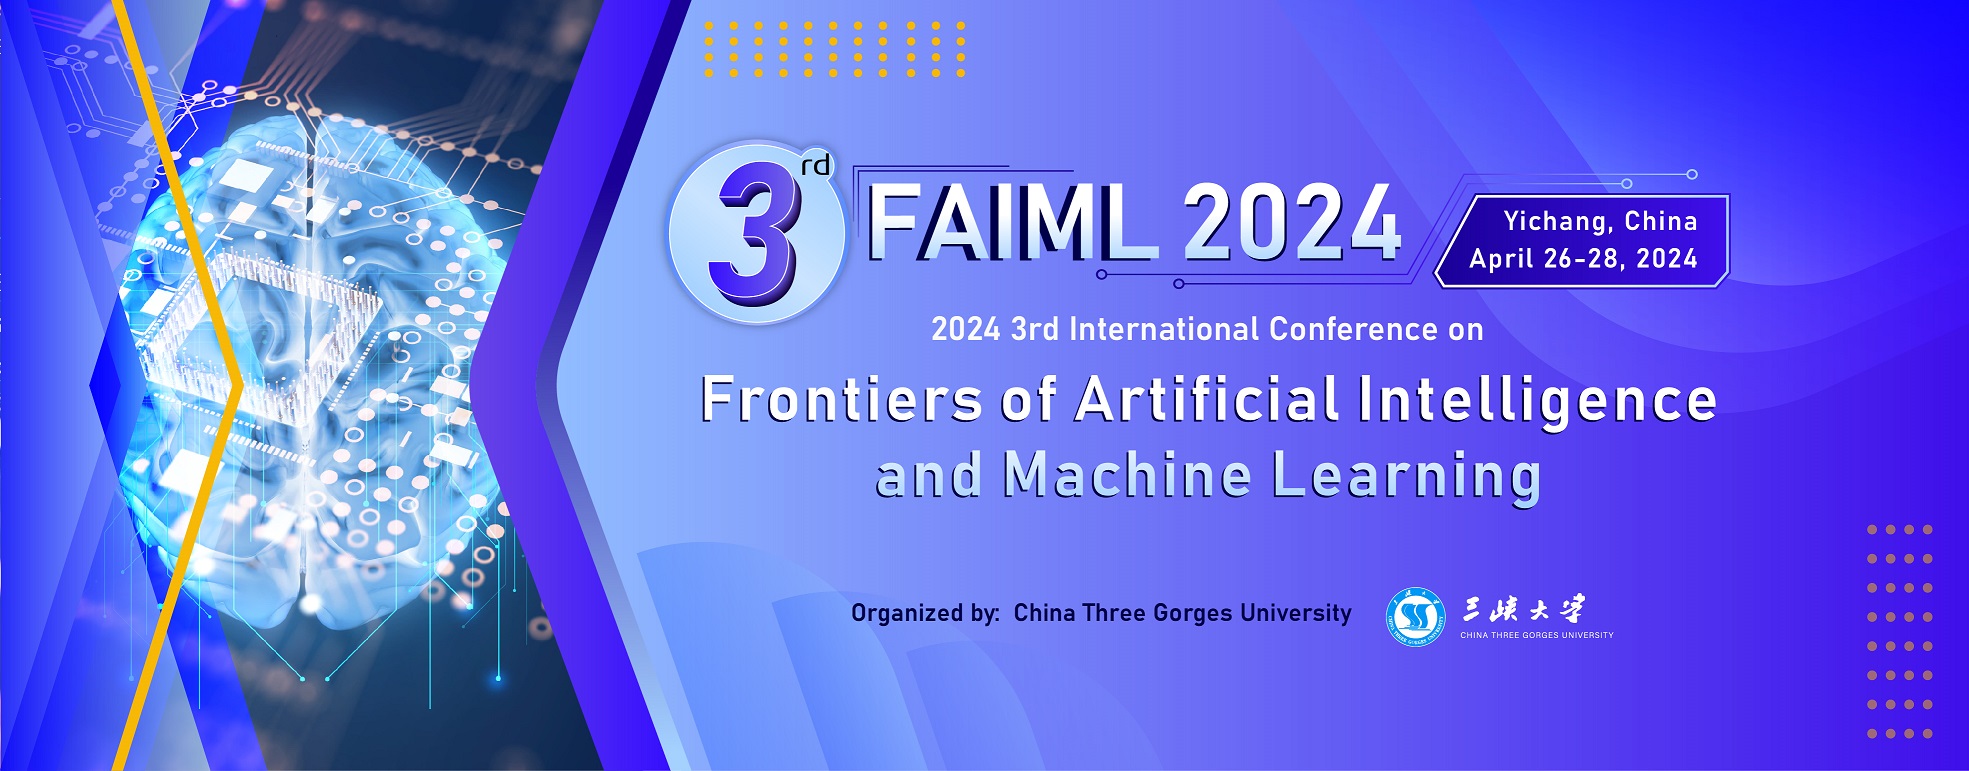 2024 3rd International Conference on Frontiers of Artificial Intelligence and Machine Learning (FAIML 2024), Yichang, Hubei, China